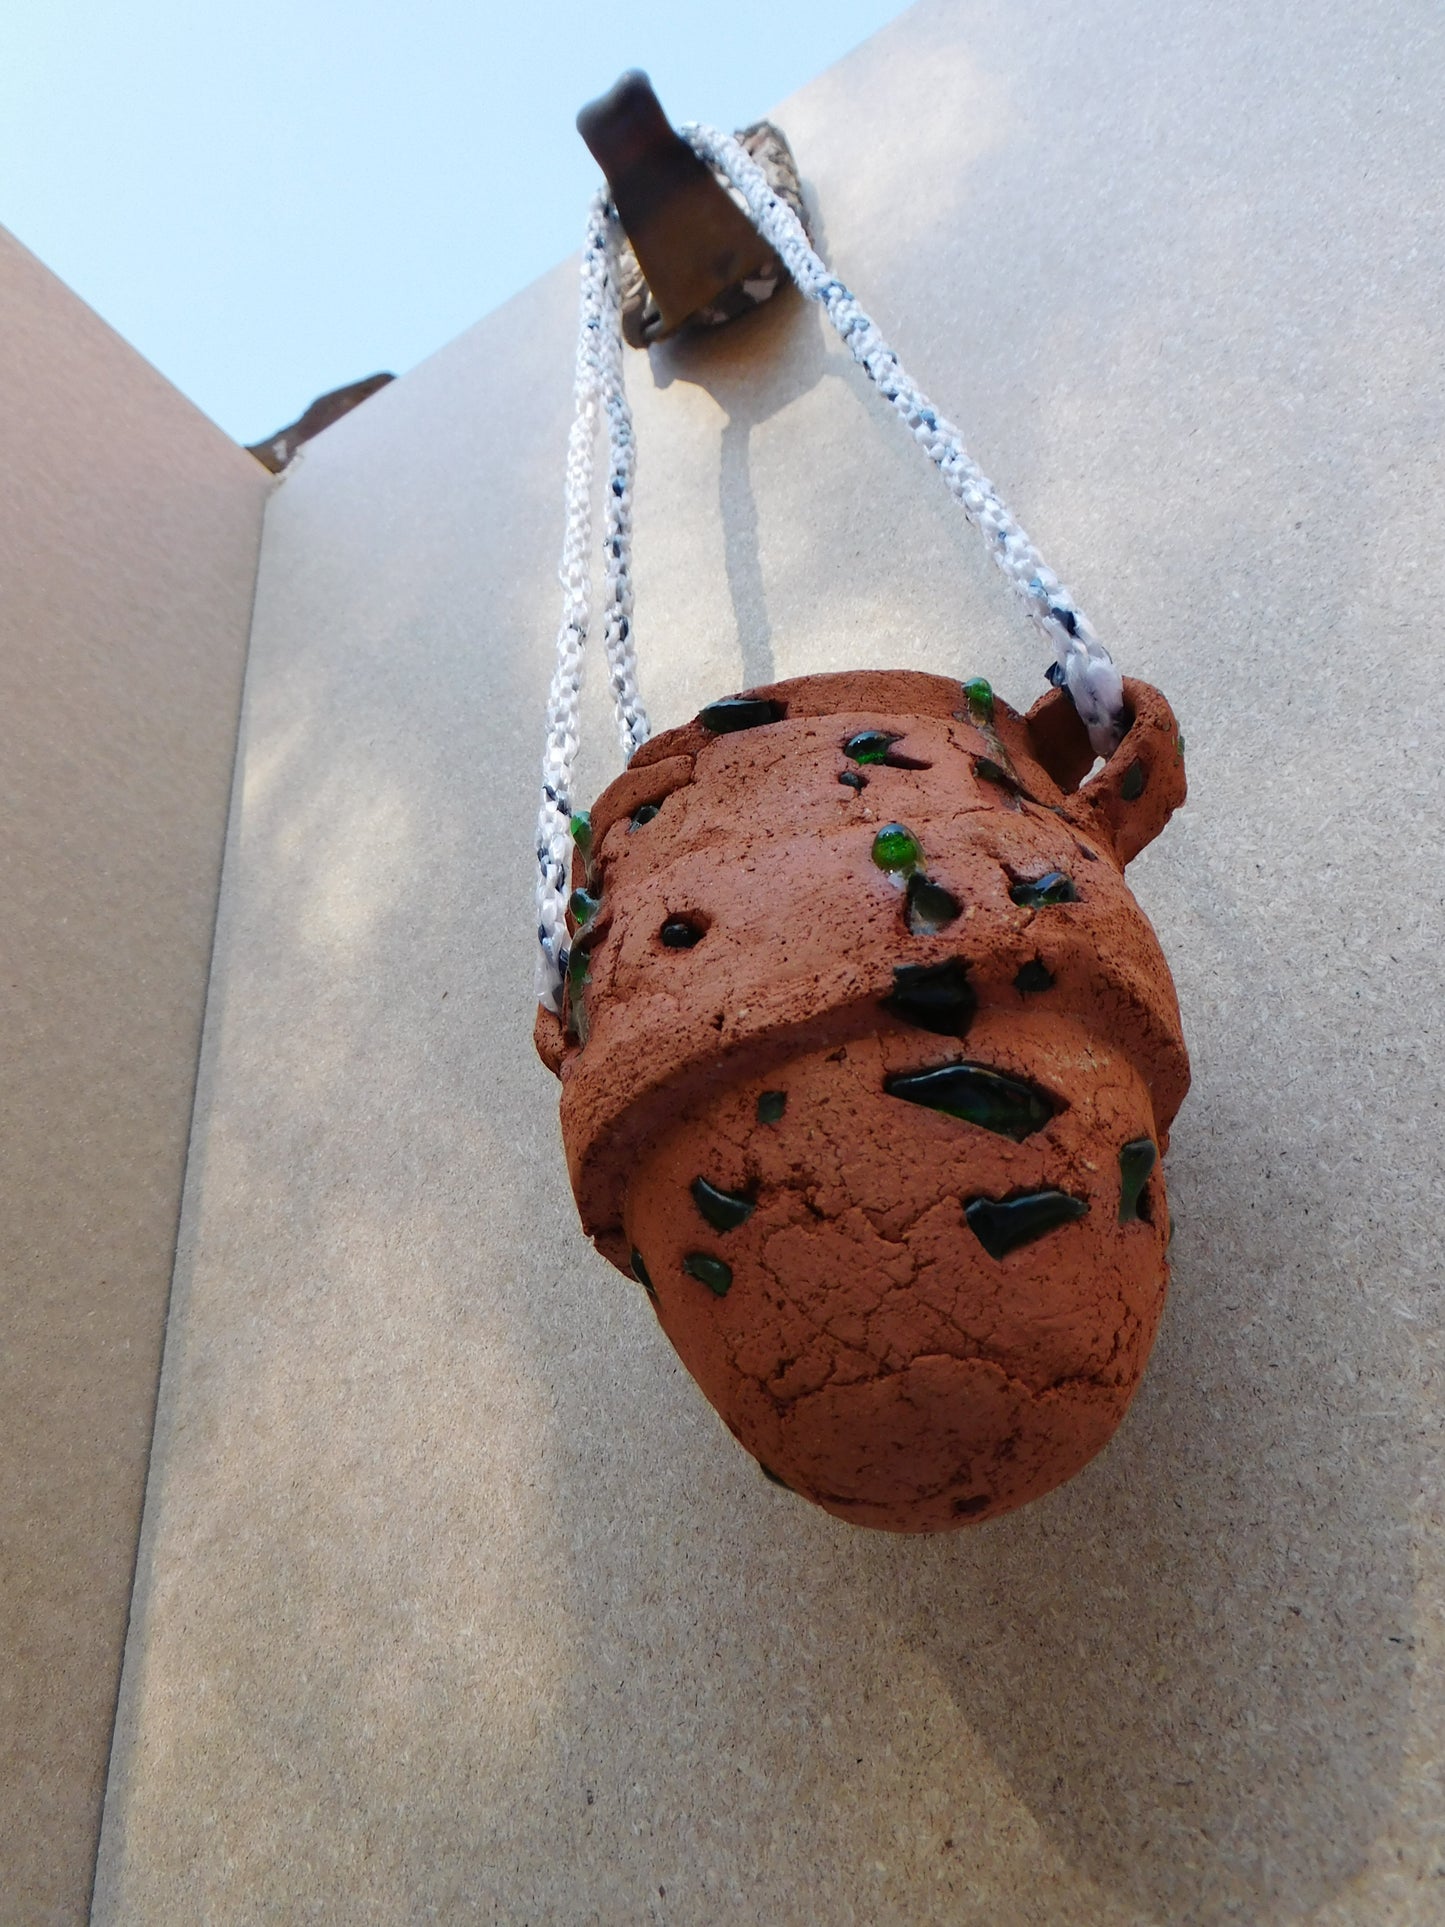 Wild Clay and Recycled Glass Hanging Planter - Primitive Purse